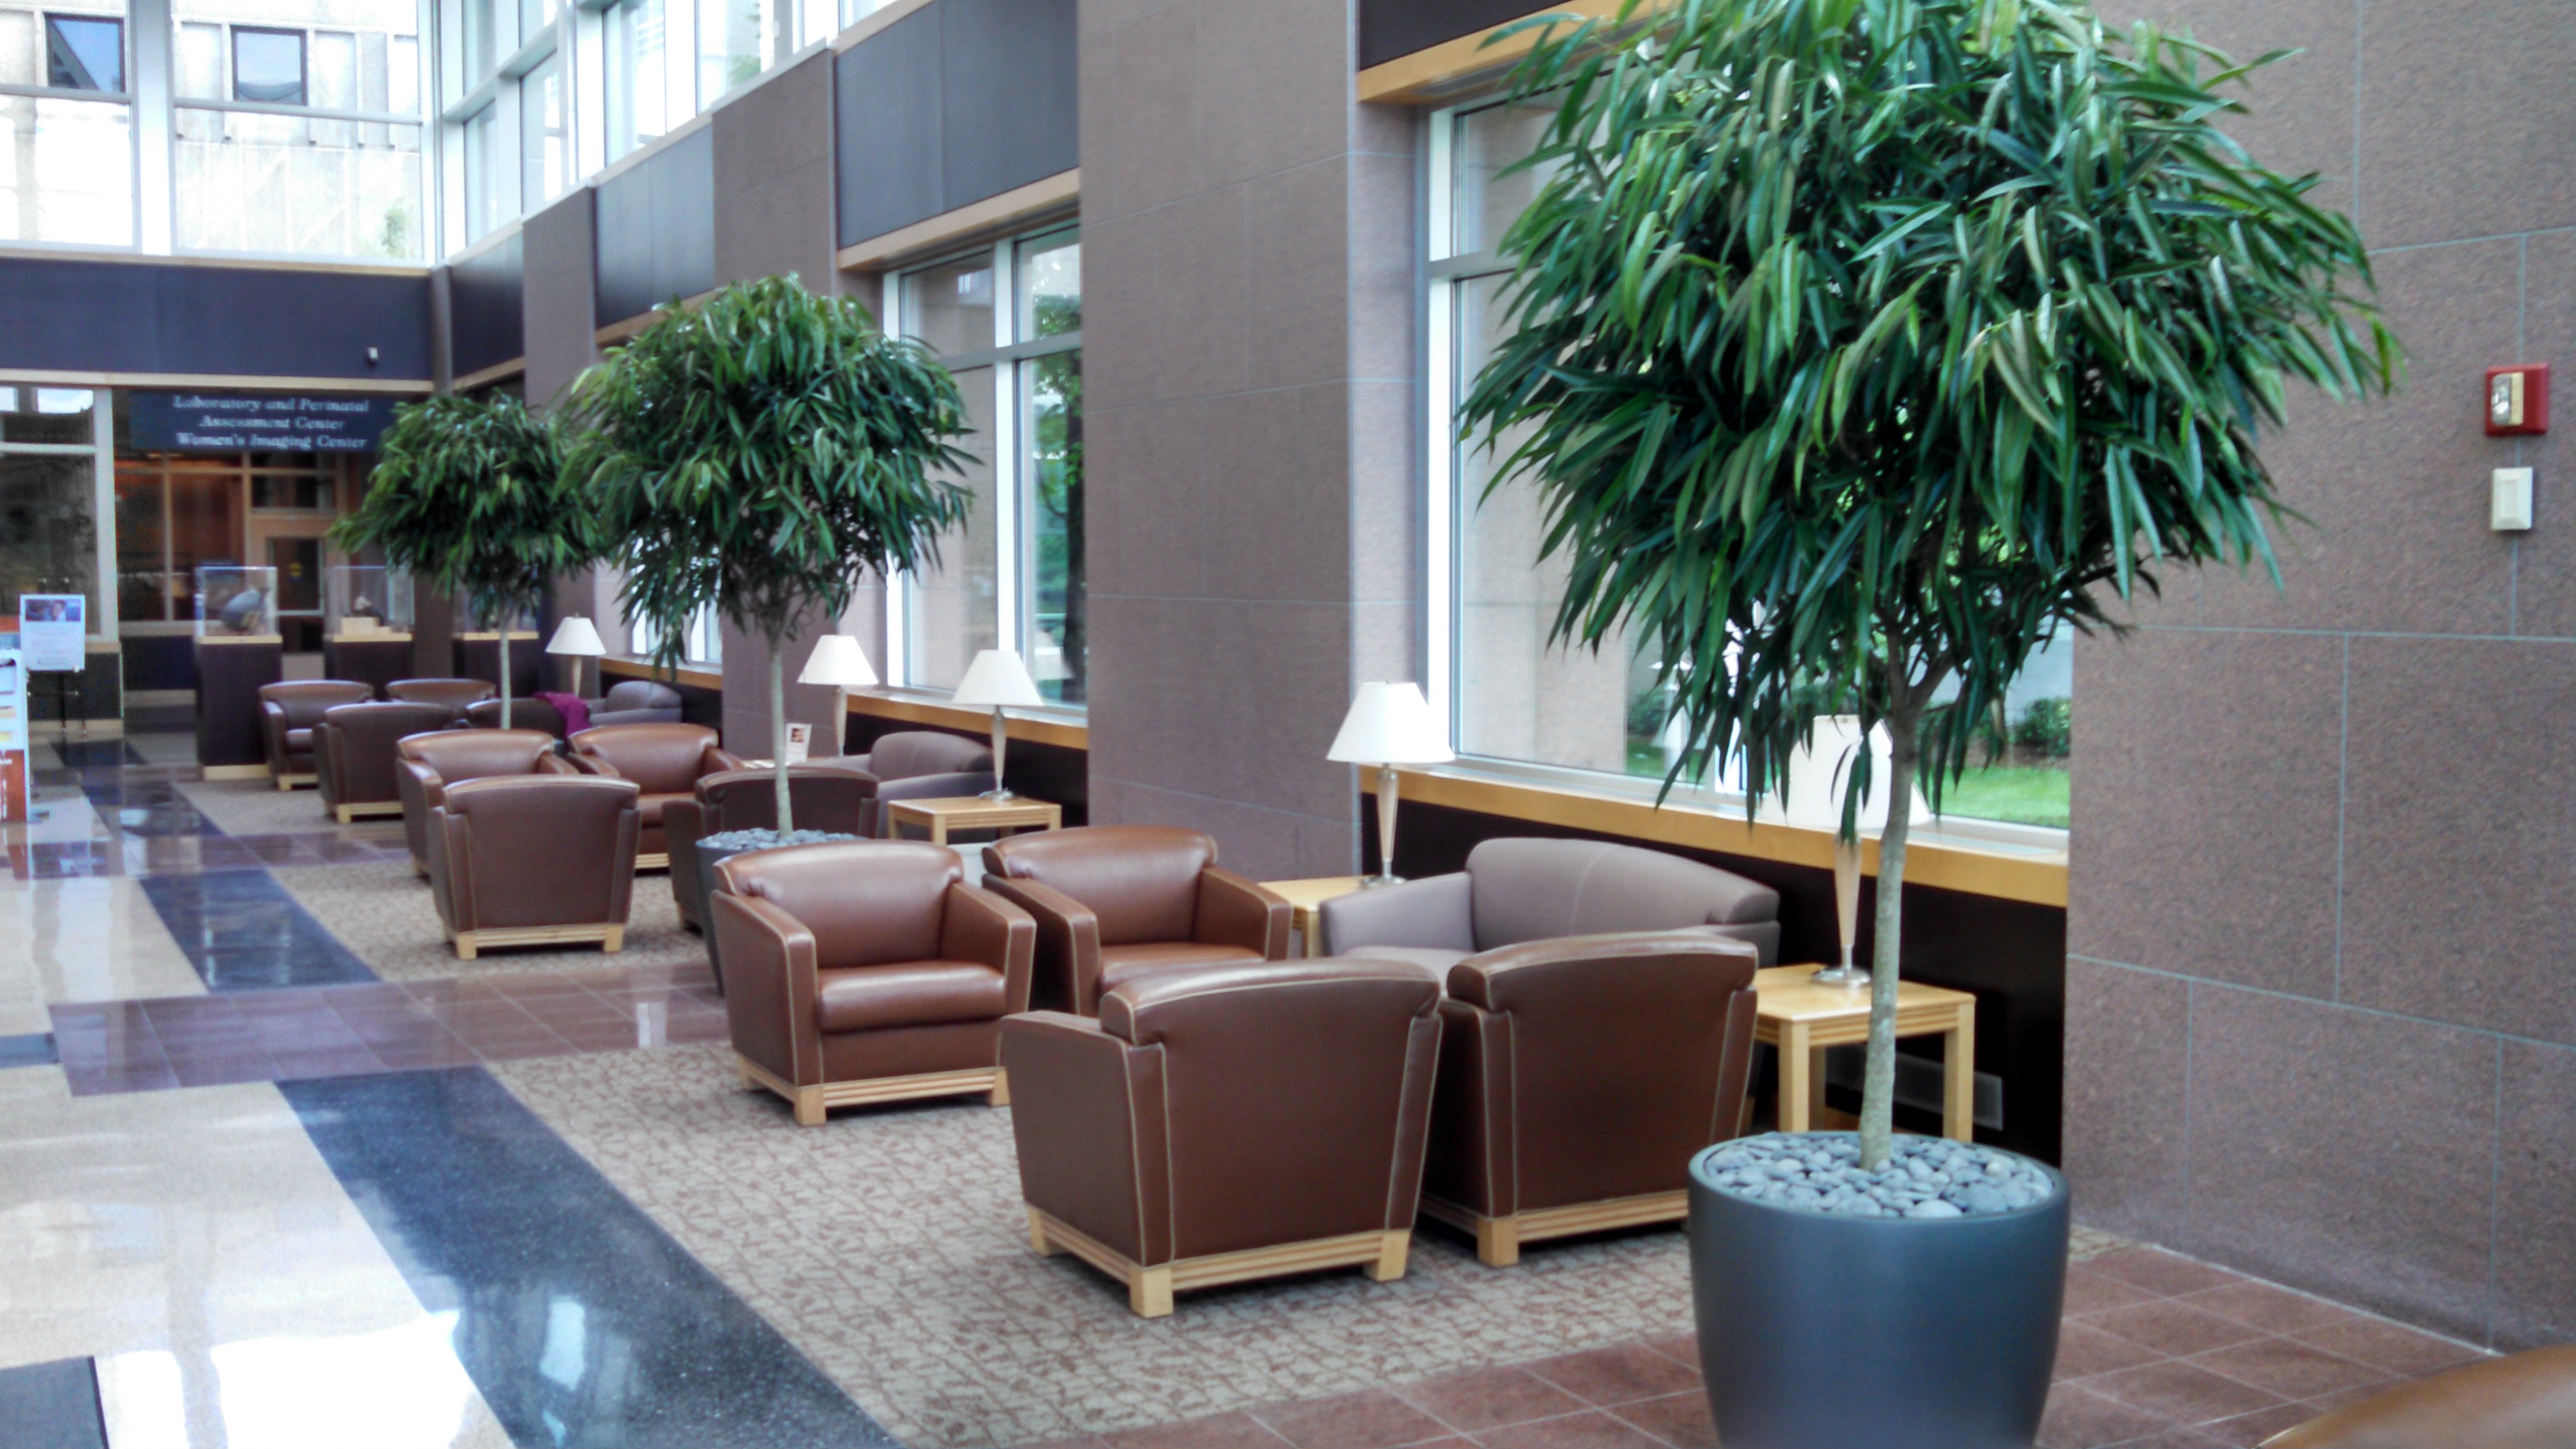 Final installation photo of Ficus Alii at Wheaton Franciscan Healthcare, Glendale, Wisconsin